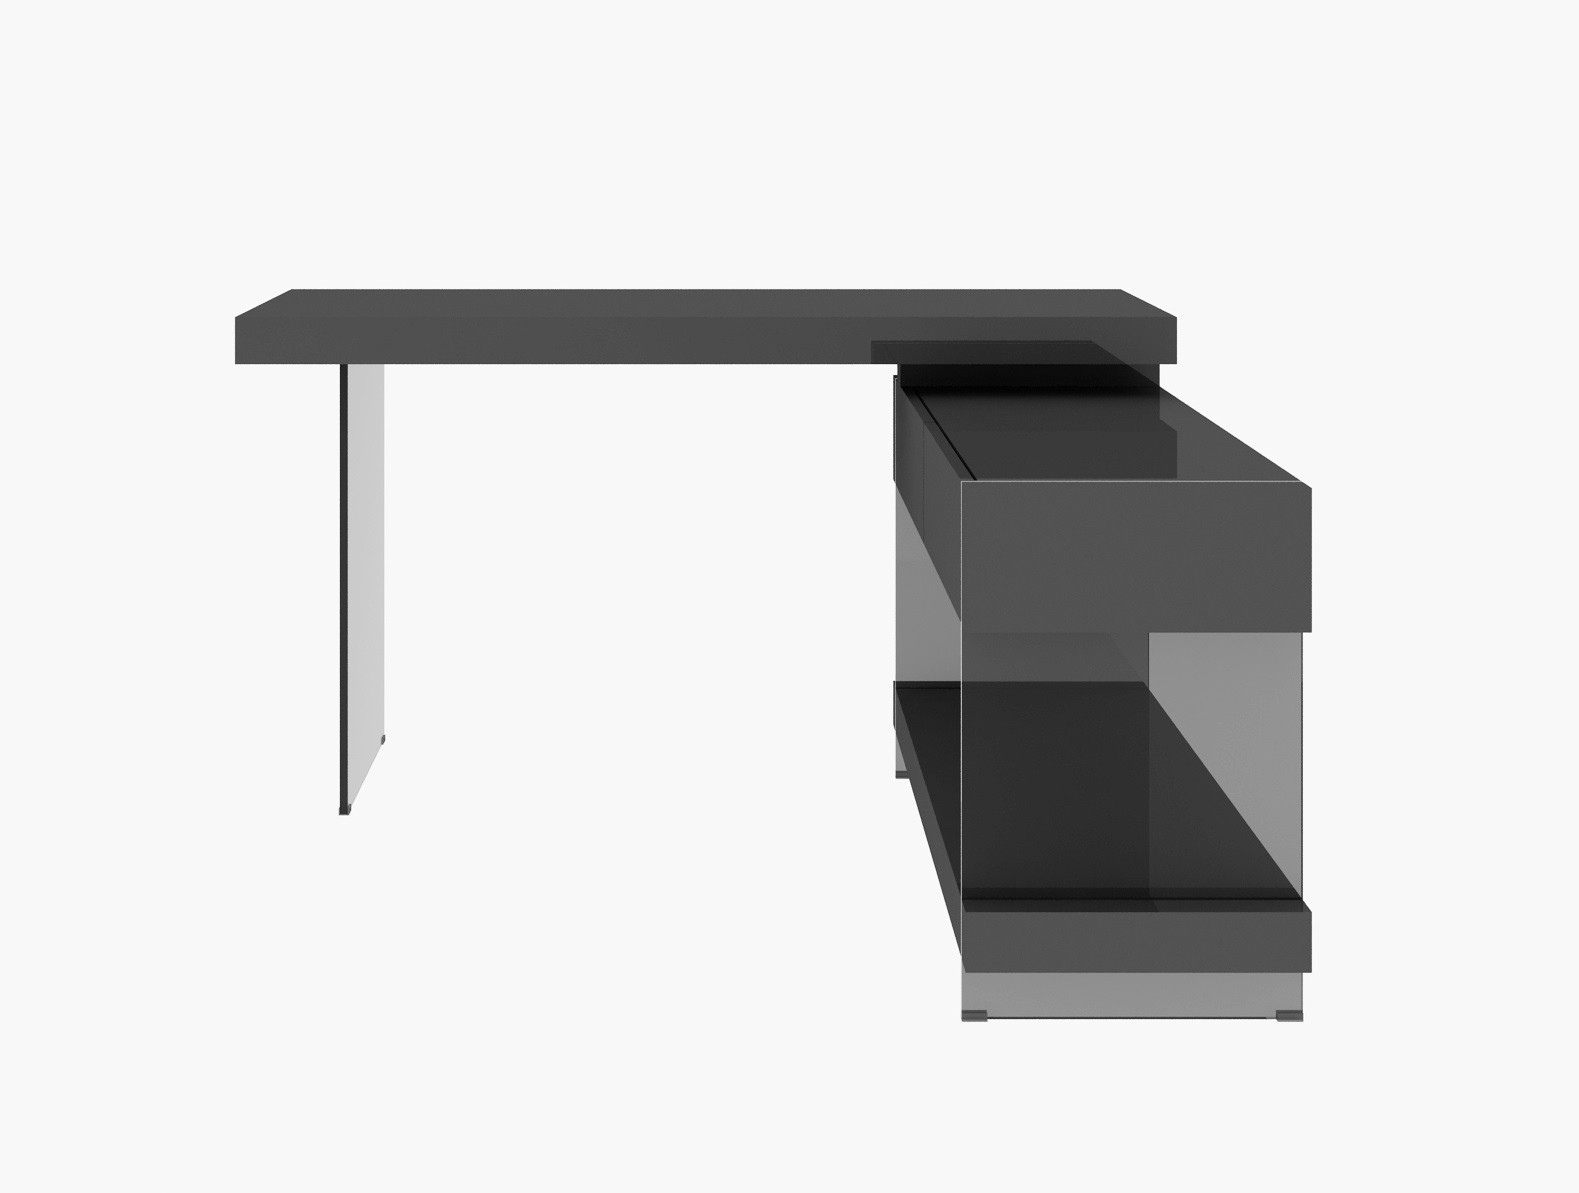 Modern Desk Furniture with Reflective Surfaces